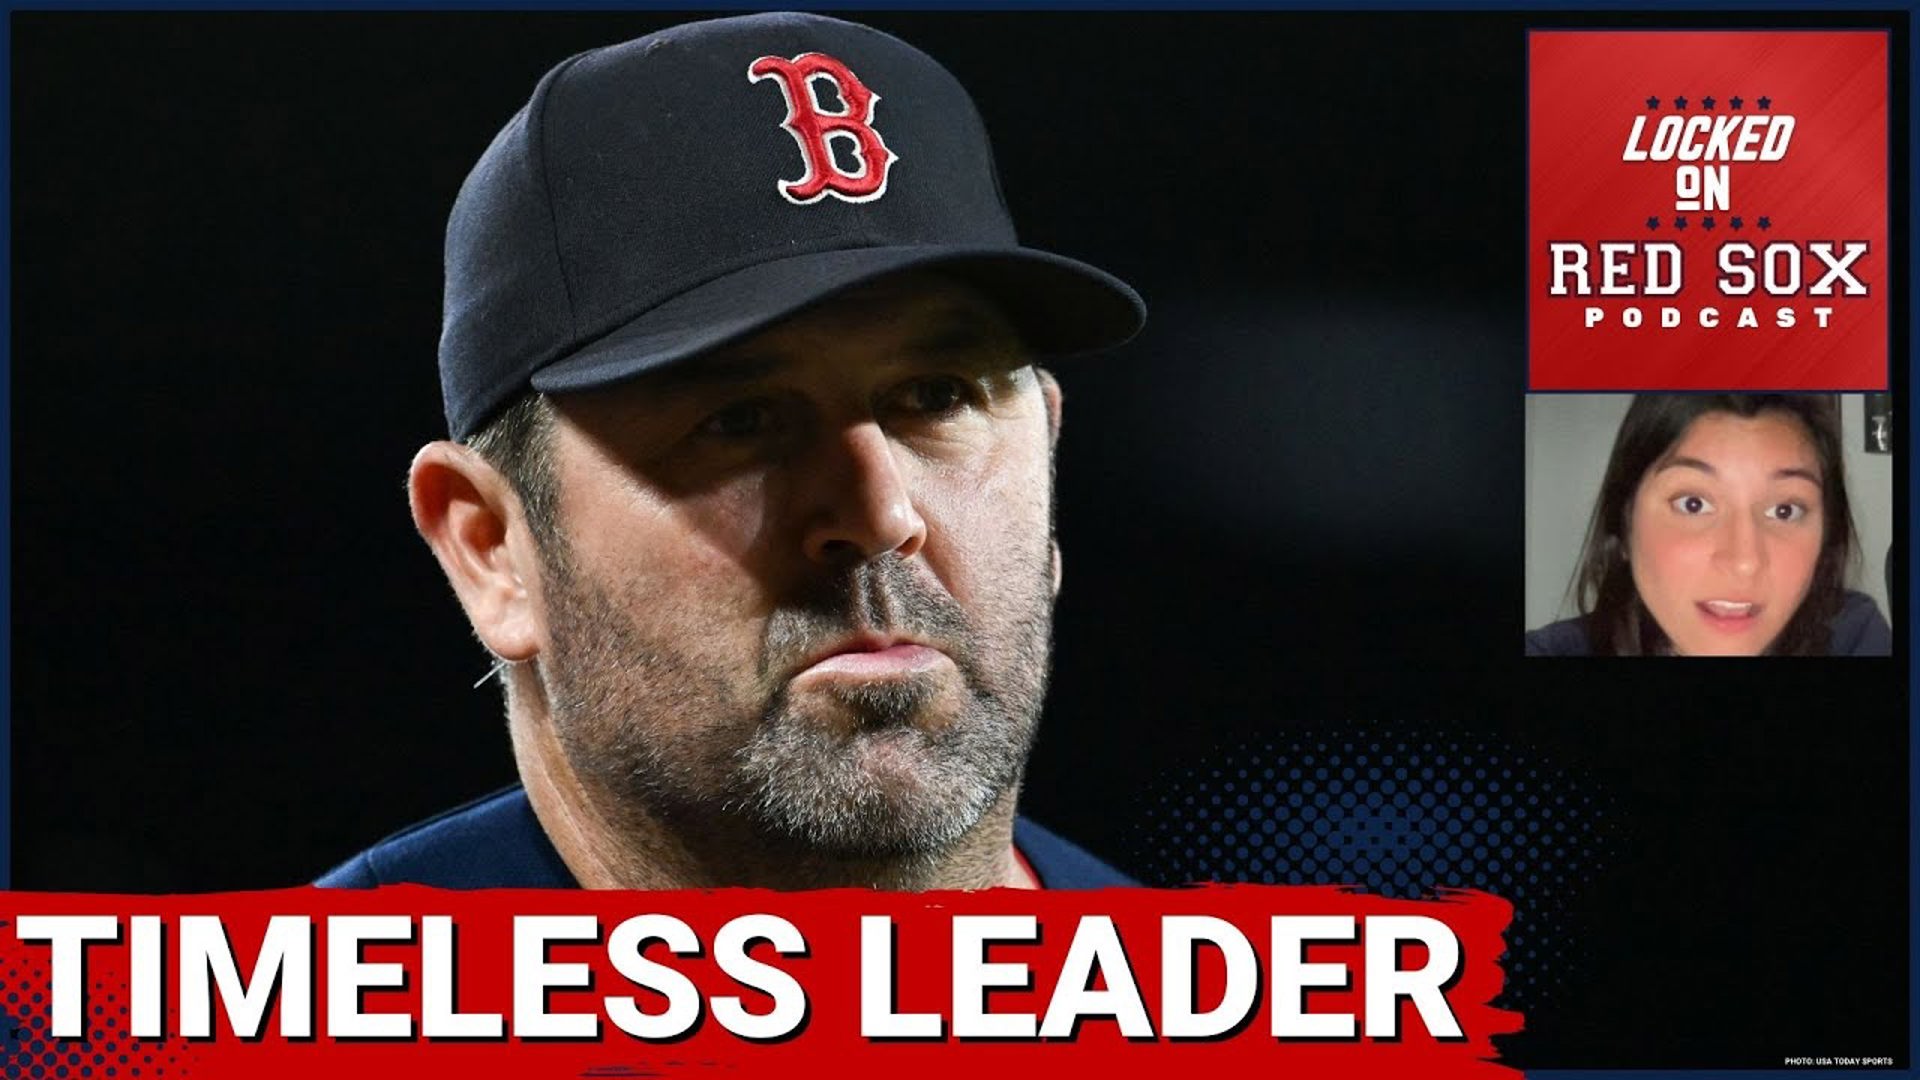 Catcher Jason Varitek has always been known for his constant dedication to baseball and for putting his full heart and soul into playing the game for the Red Sox.